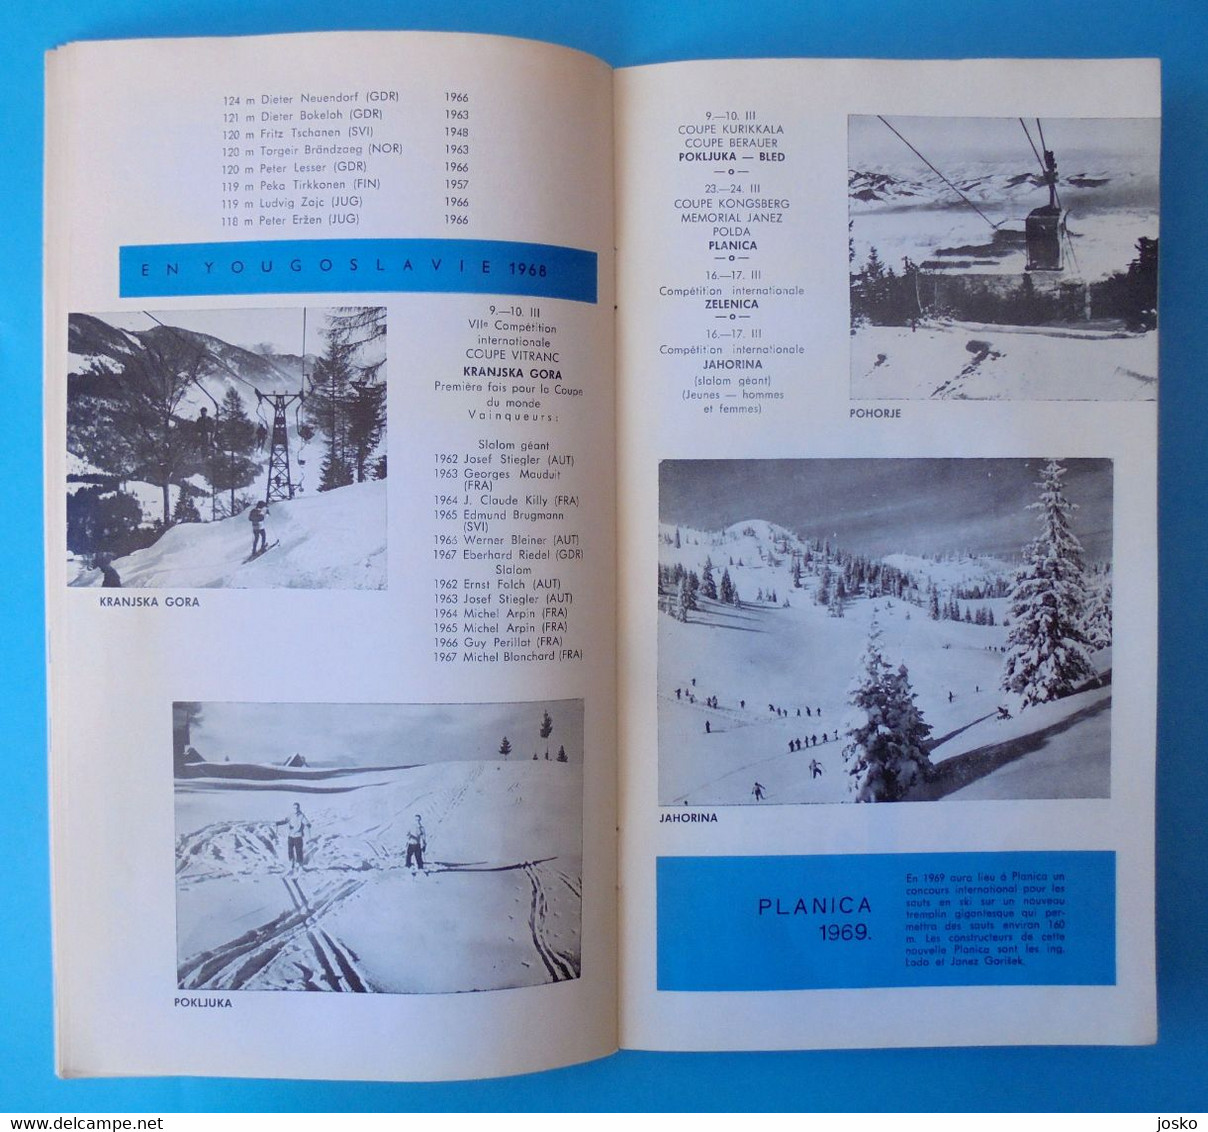 WINTER OLYMPIC GAMES GRENOBLE 1968 - Yugoslavia team guide JEUX OLYMPIQUES D'HIVER 1968 Olympia Olympiade Olimpici